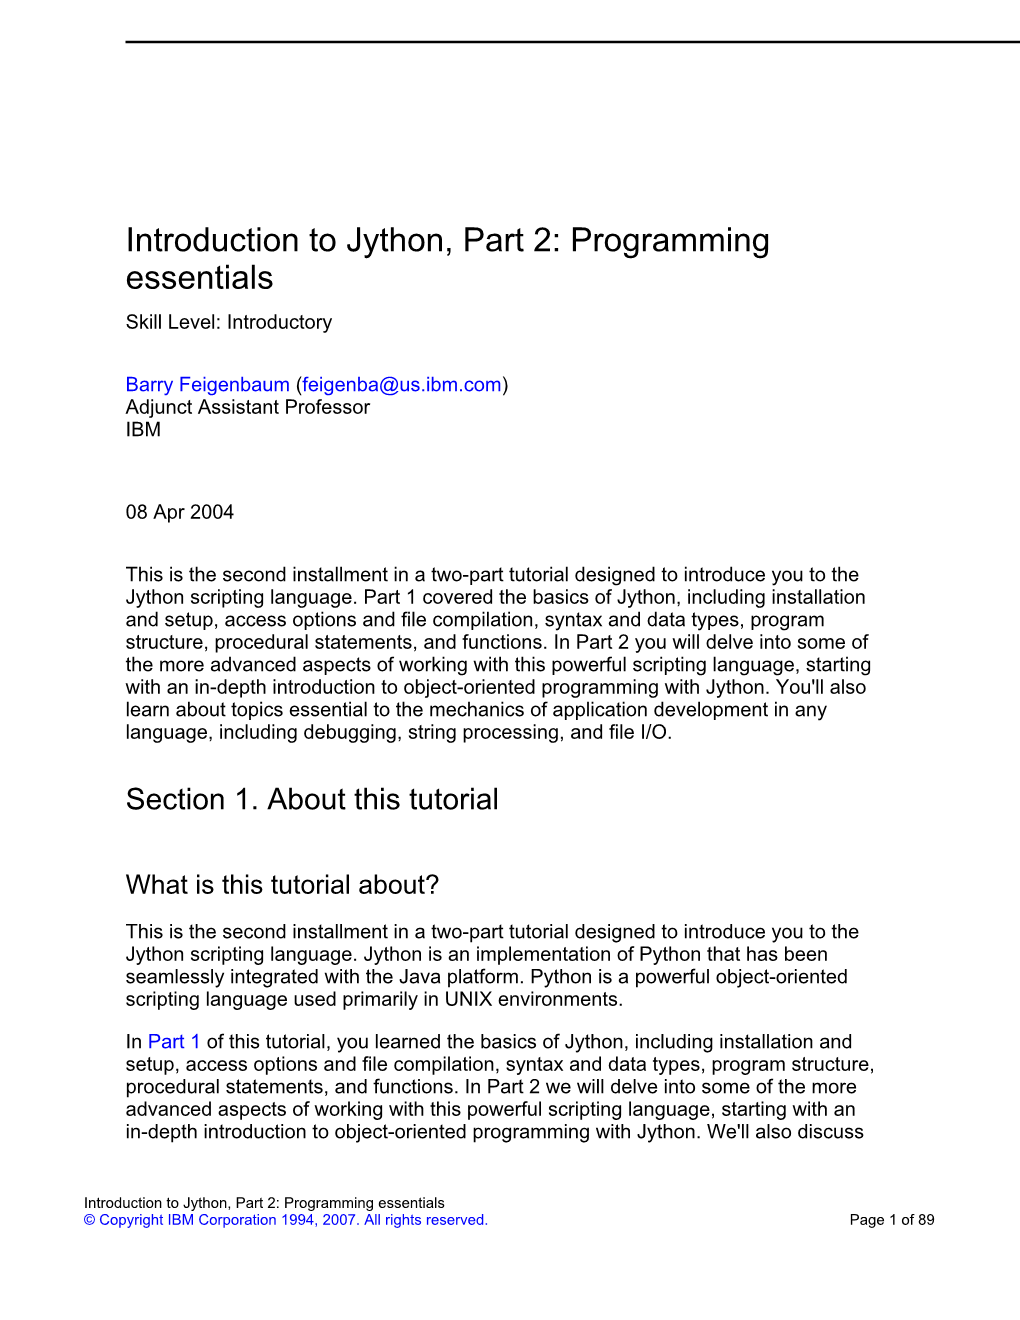 Introduction to Jython, Part 2: Programming Essentials Skill Level: Introductory